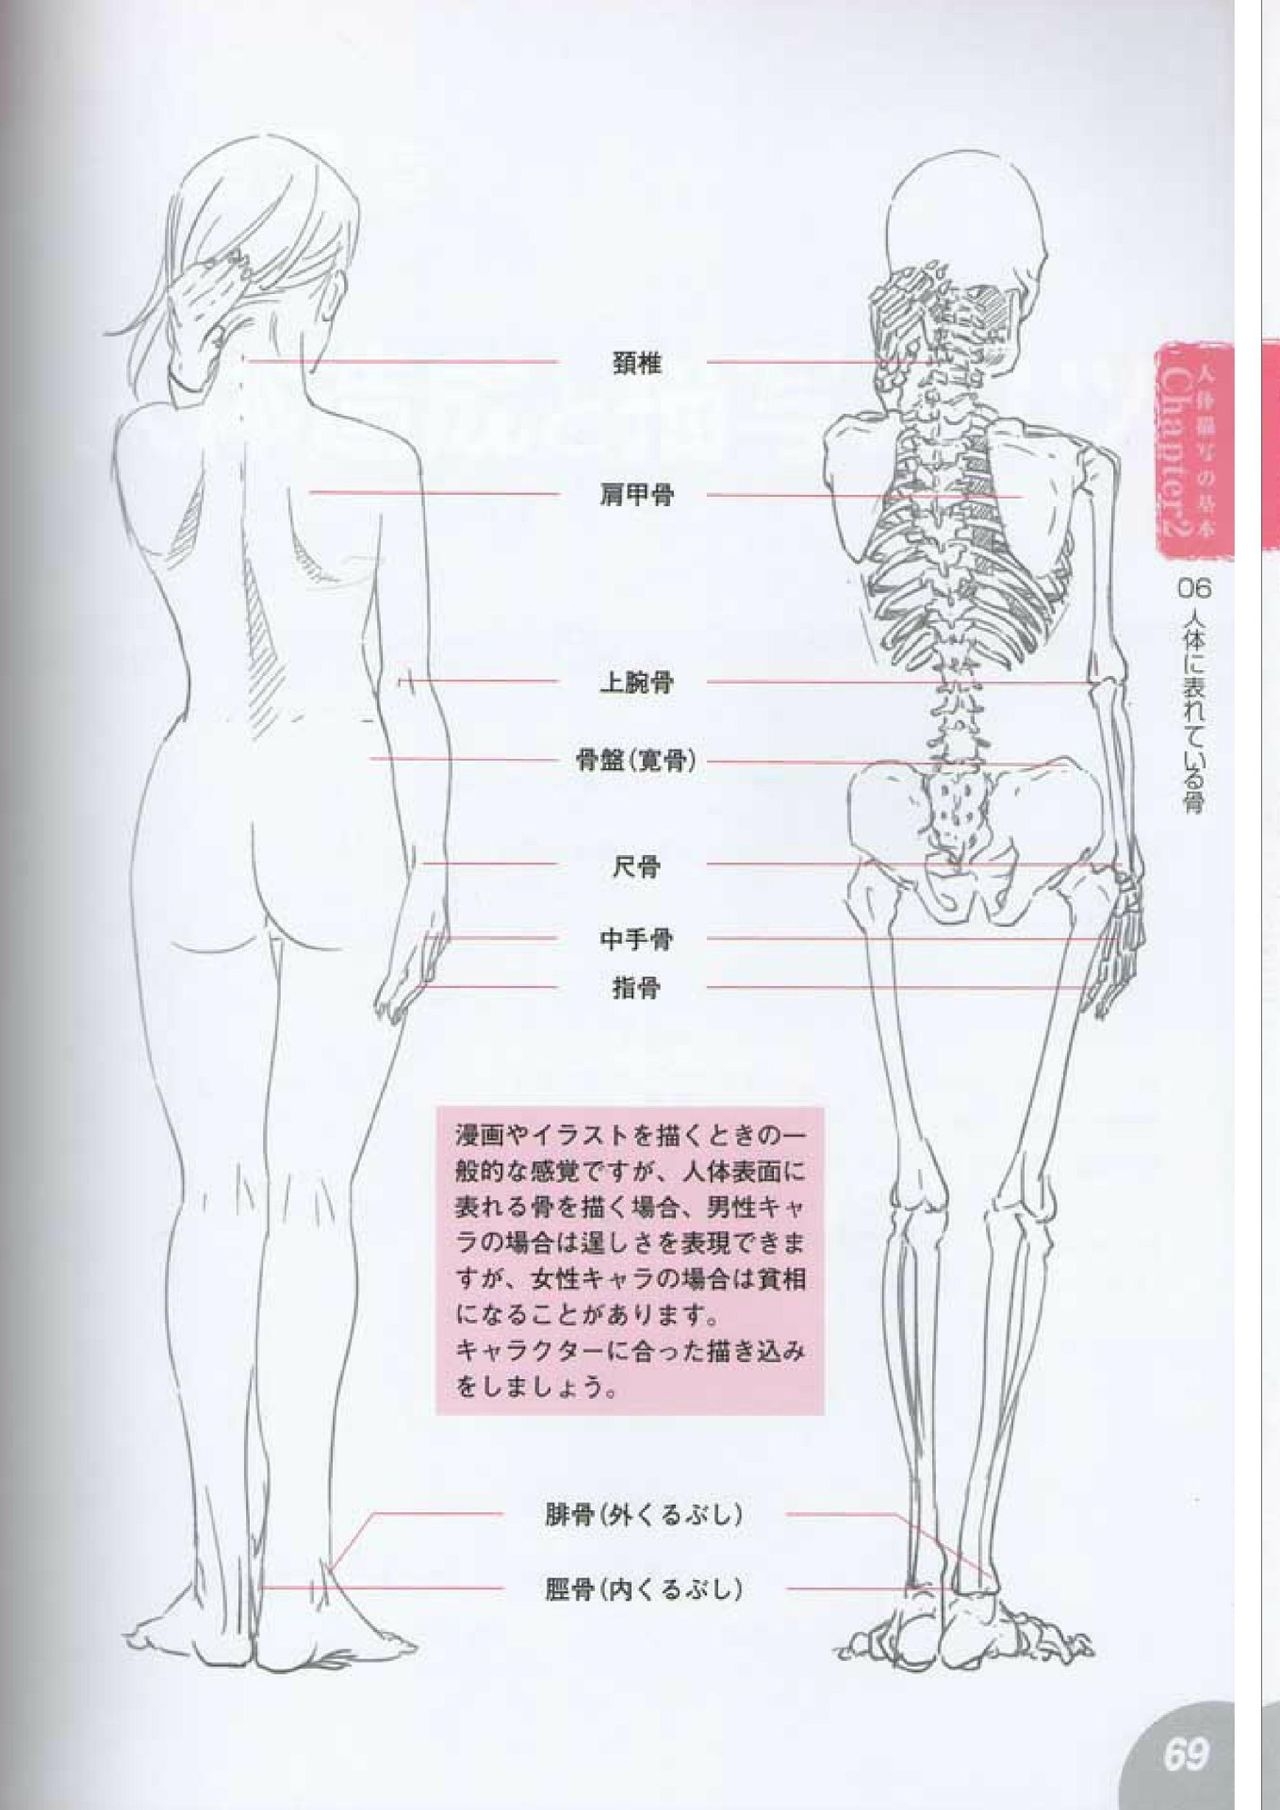 How to draw a character drawing from a human anatomical chart 67